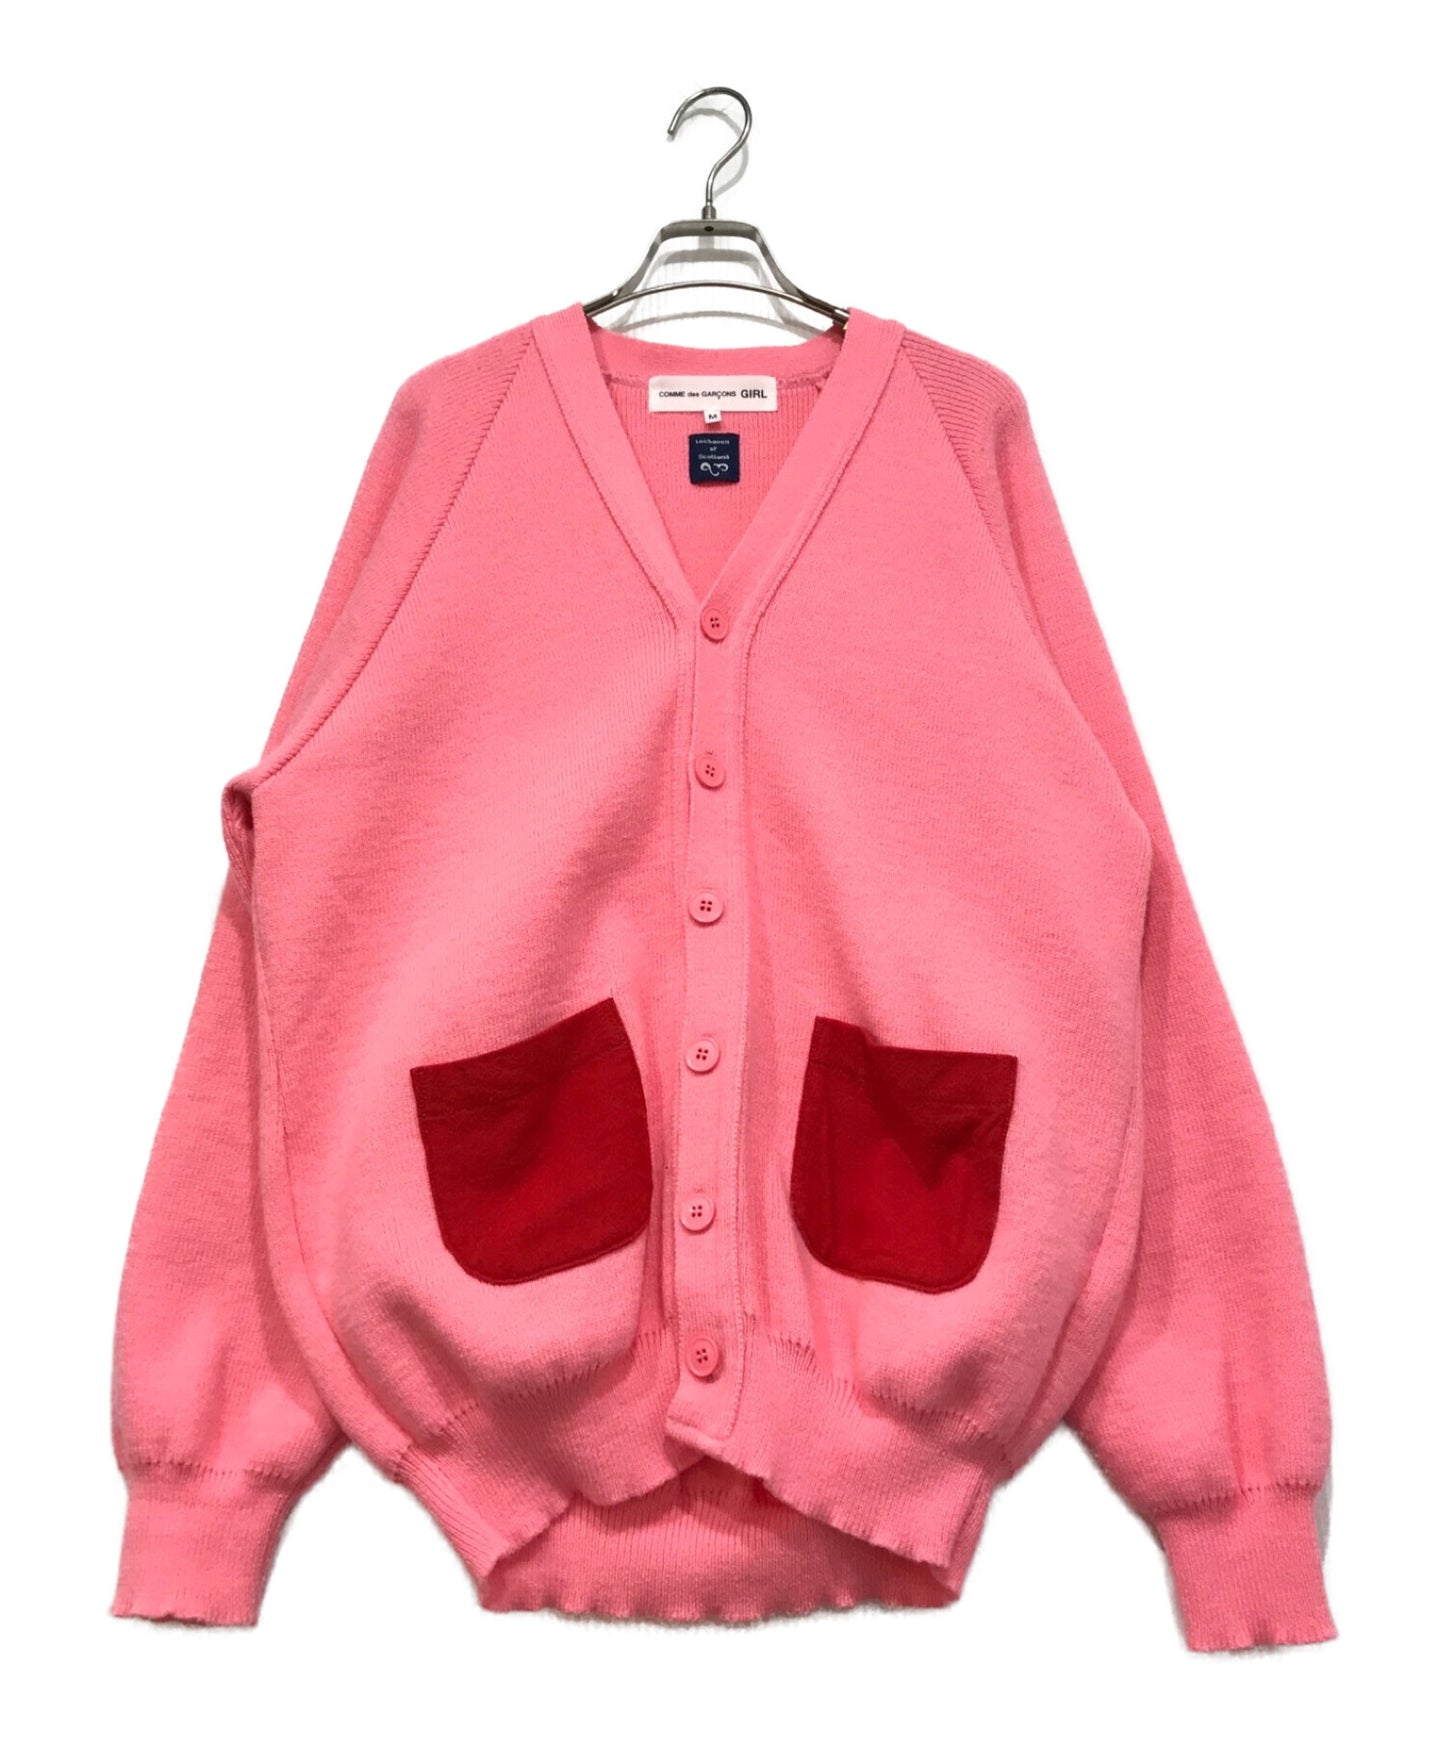 COMME des GARCONS GIRL edition cardigan NH-N501